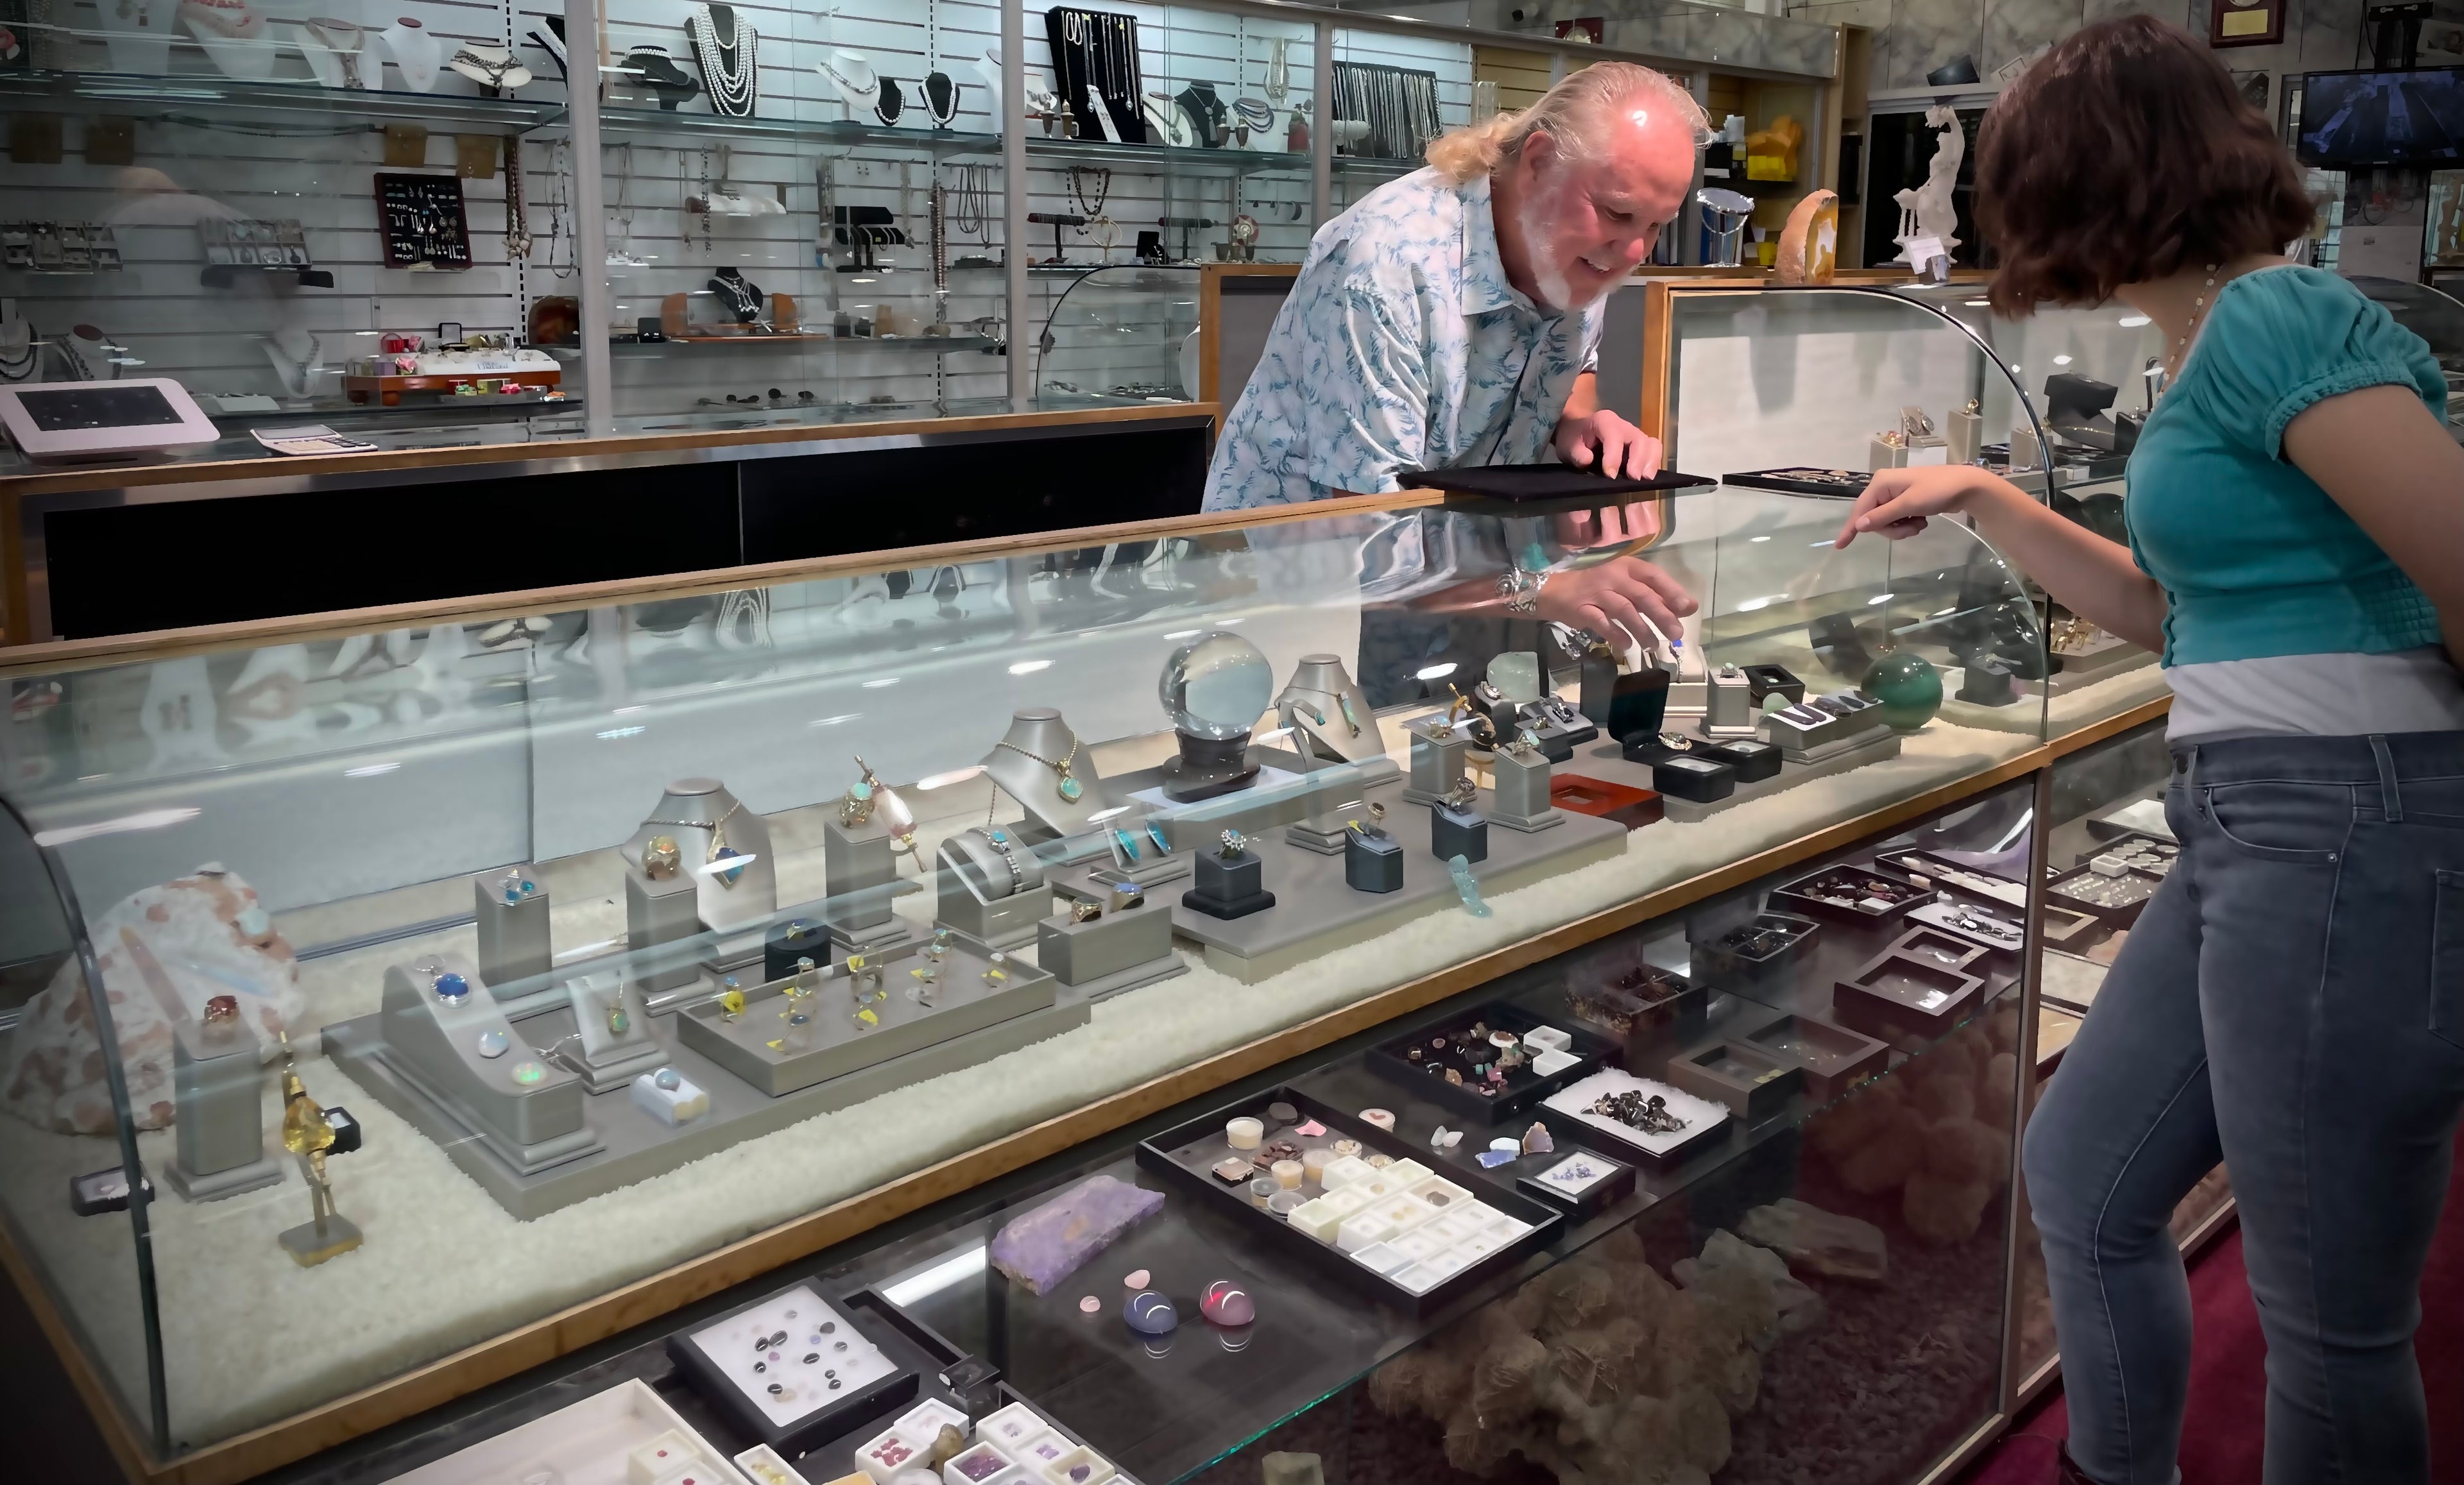 A customer is helped by a smiling jeweler.  Many gems, stones, and rings are seen.